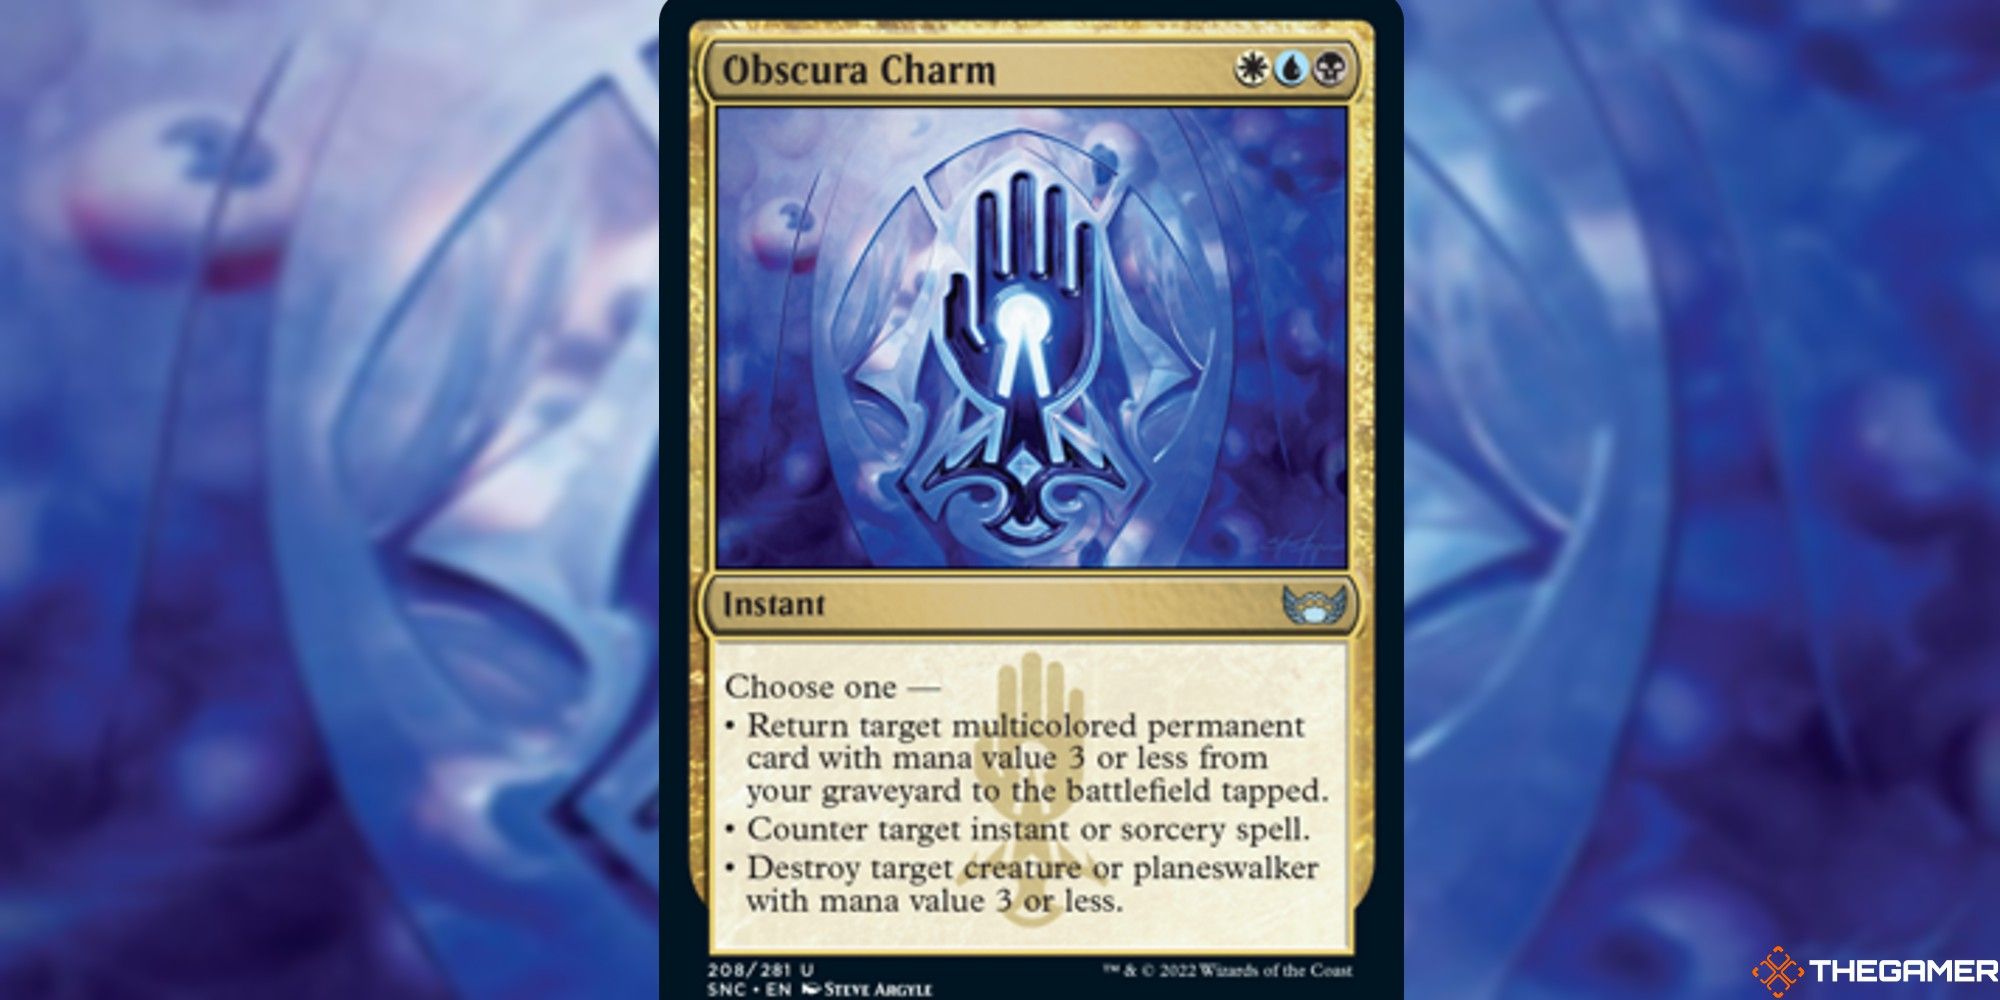 mtg obscura charm full card with art background